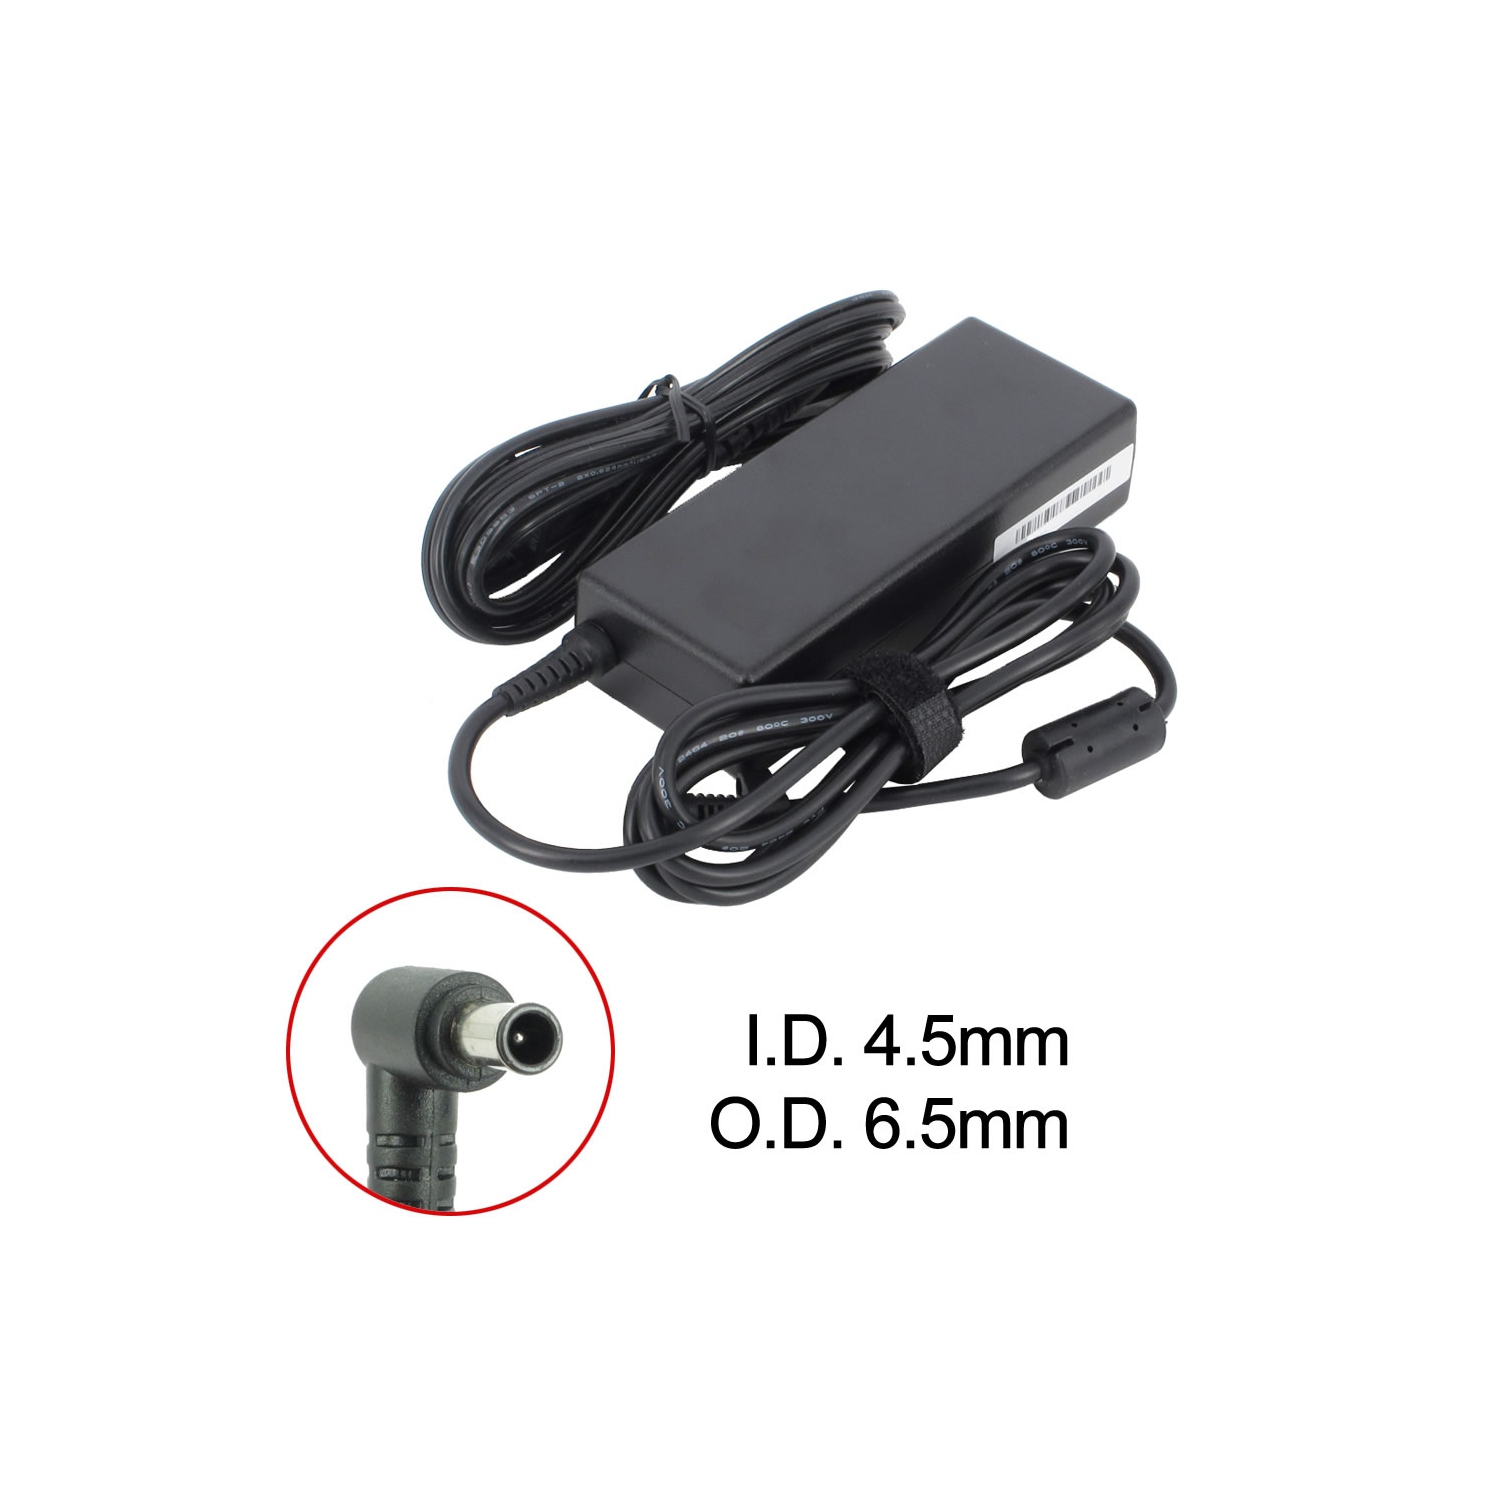 Brand New Laptop AC Adapter for Sony VAIO VGN-BZ563P23, PCGA-AC19V1, PCGA-AC19V23, VGP-AC19V19, VGP-AC19V27, VGP-AC19V48